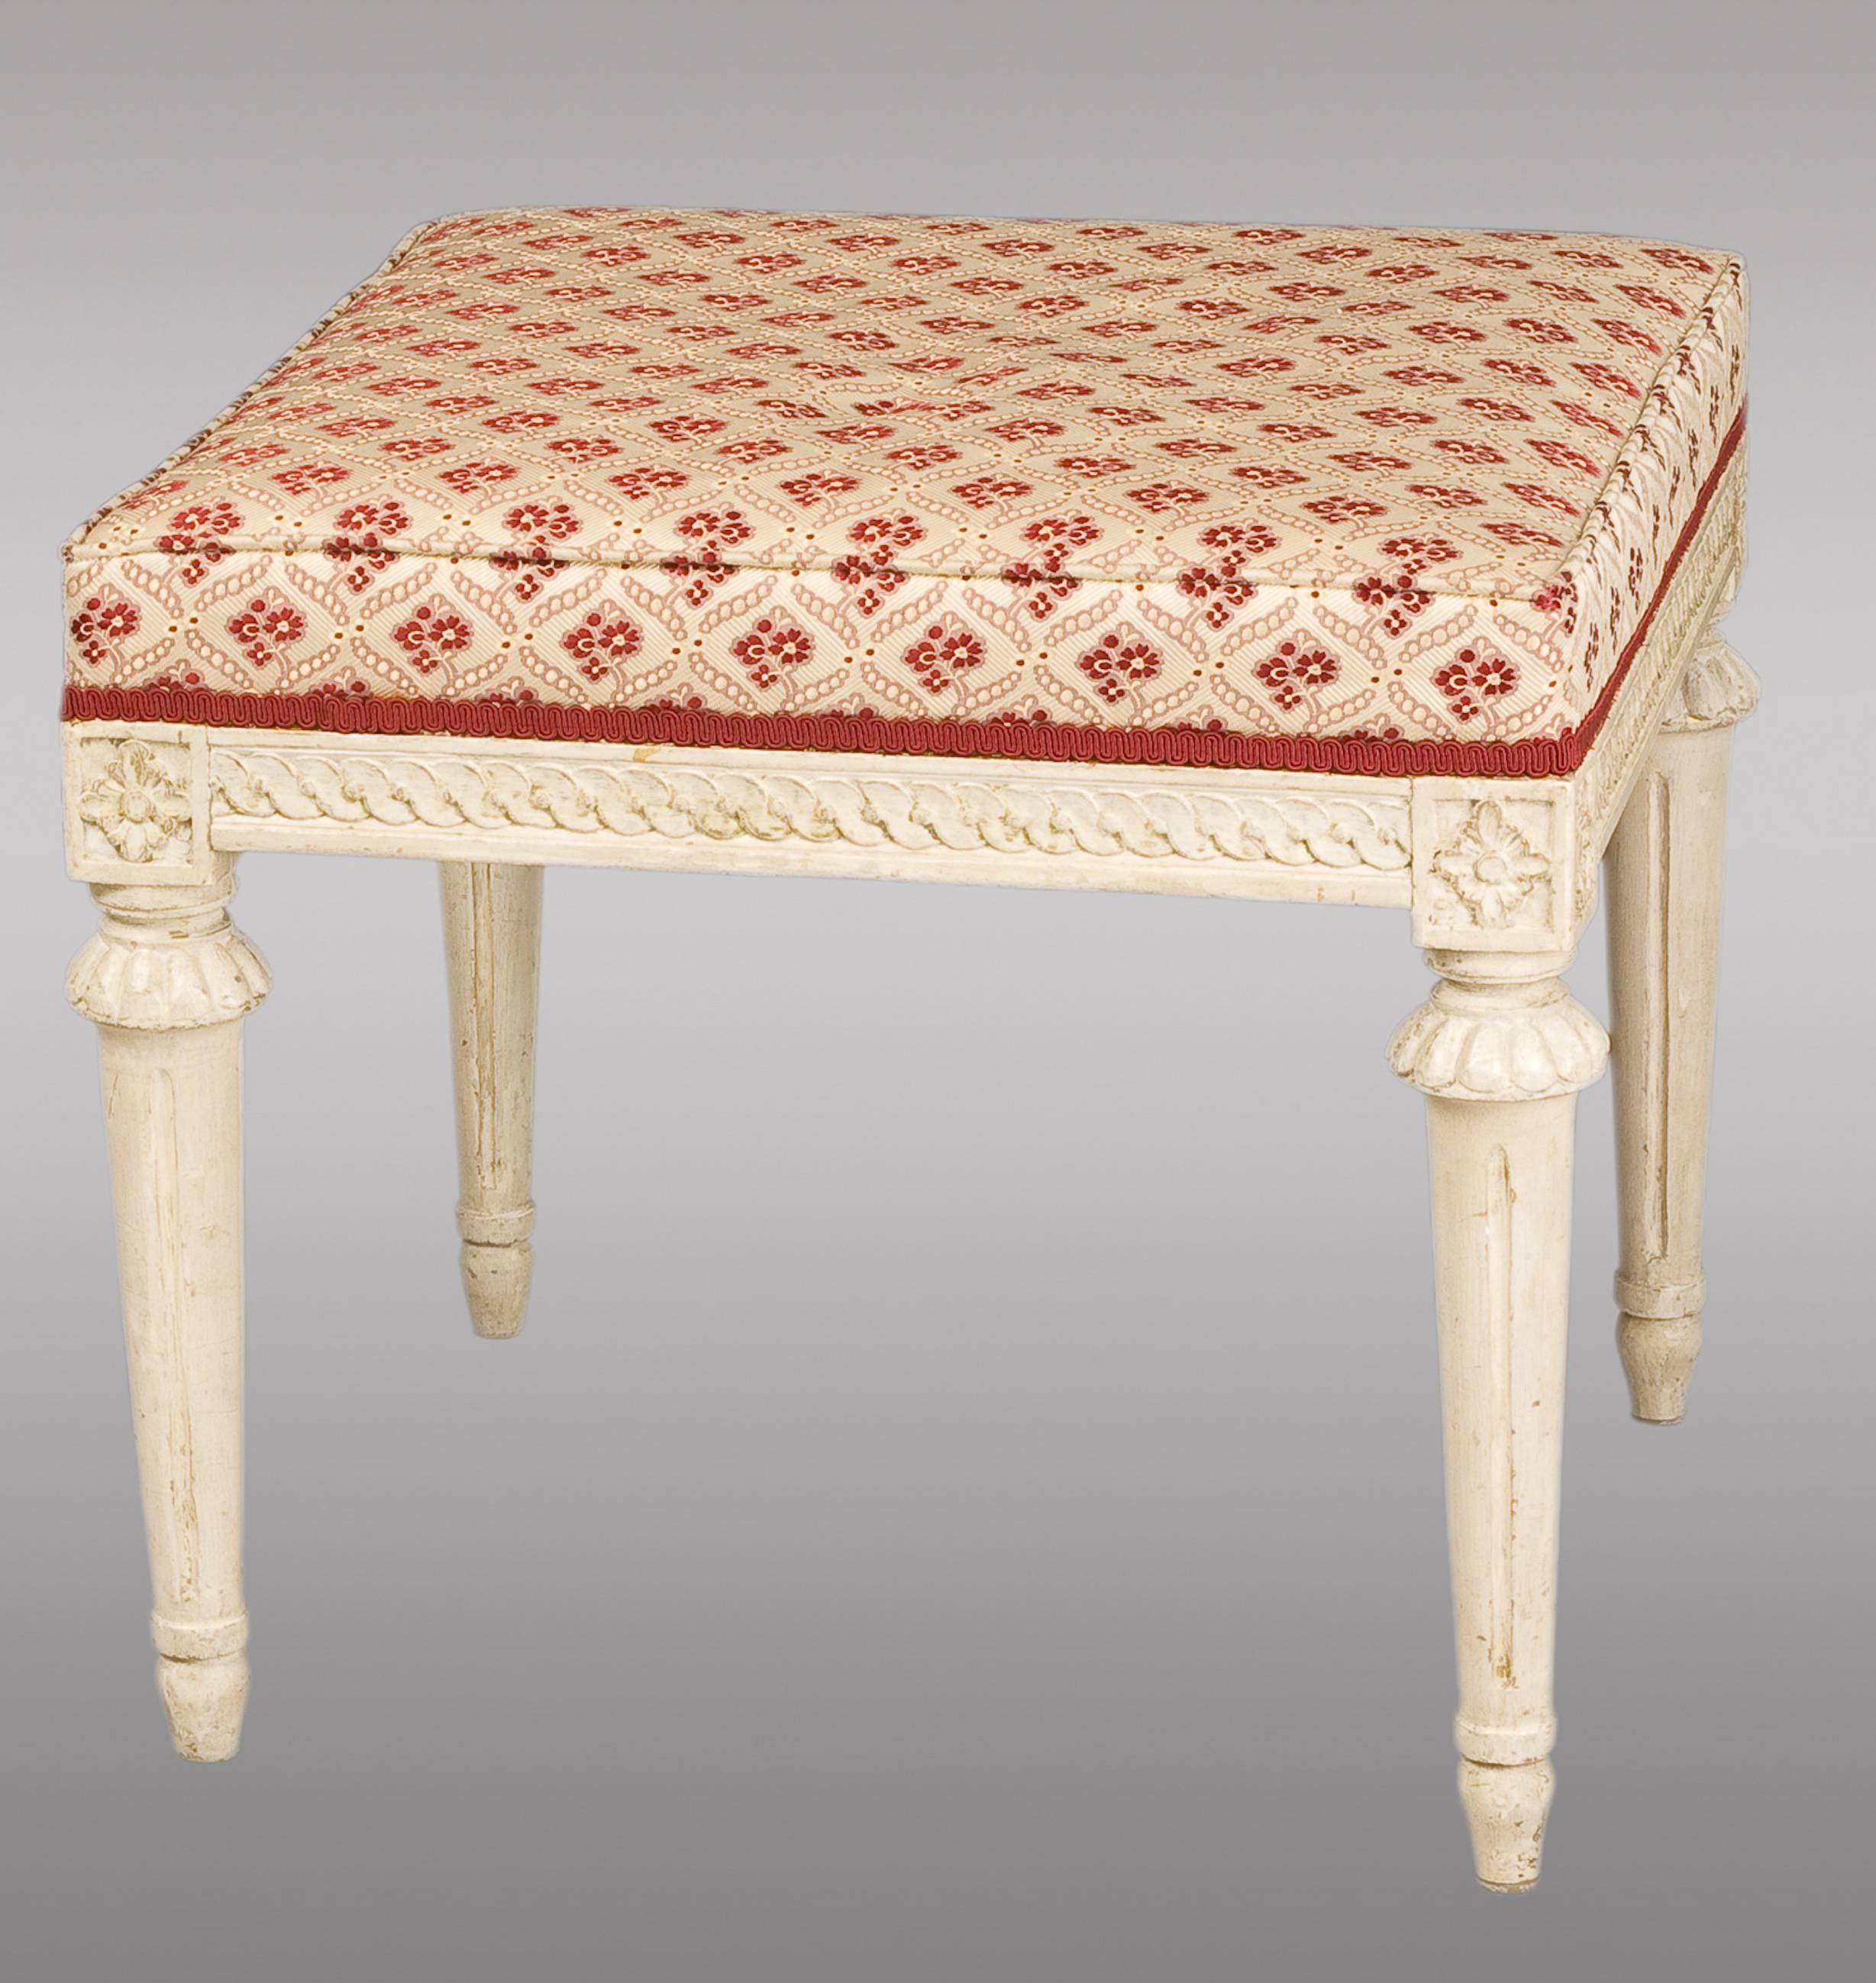 Pair of carved wood Swedish stools, 18th century
Upholstered in Rubelli silk.

